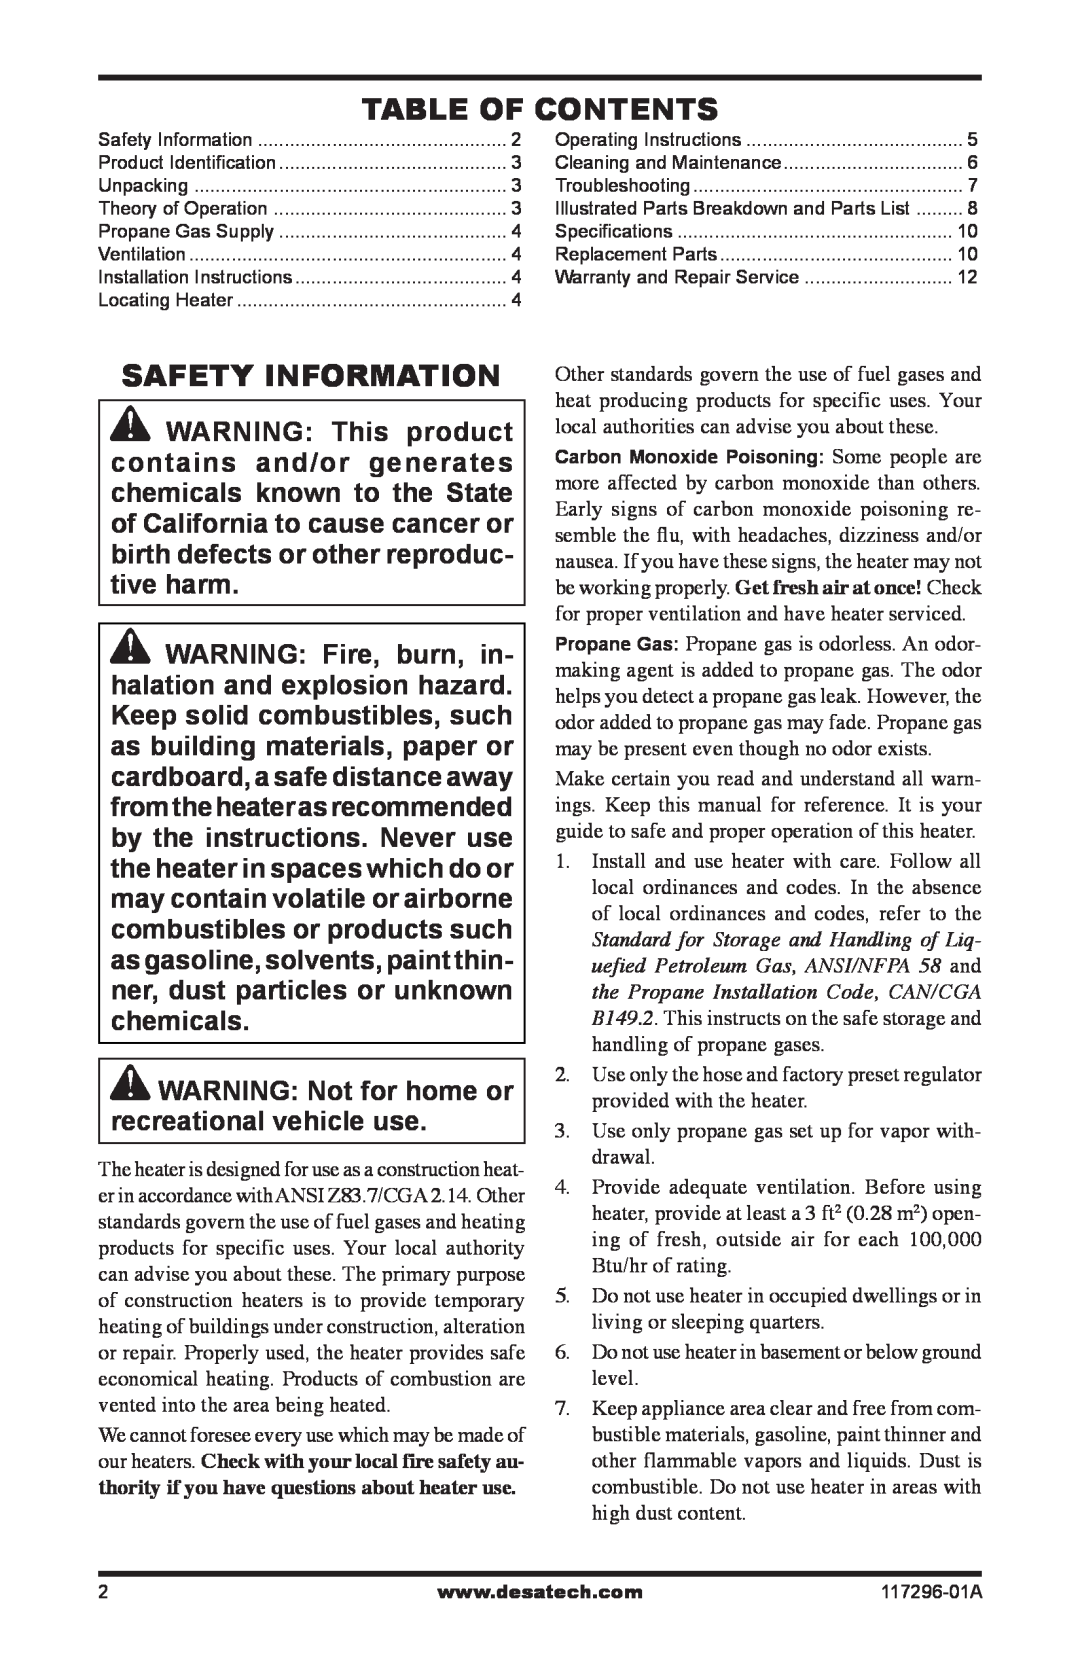 Desa 35-R owner manual Table Of Contents, Safety Information, WARNING Not for home or recreational vehicle use 